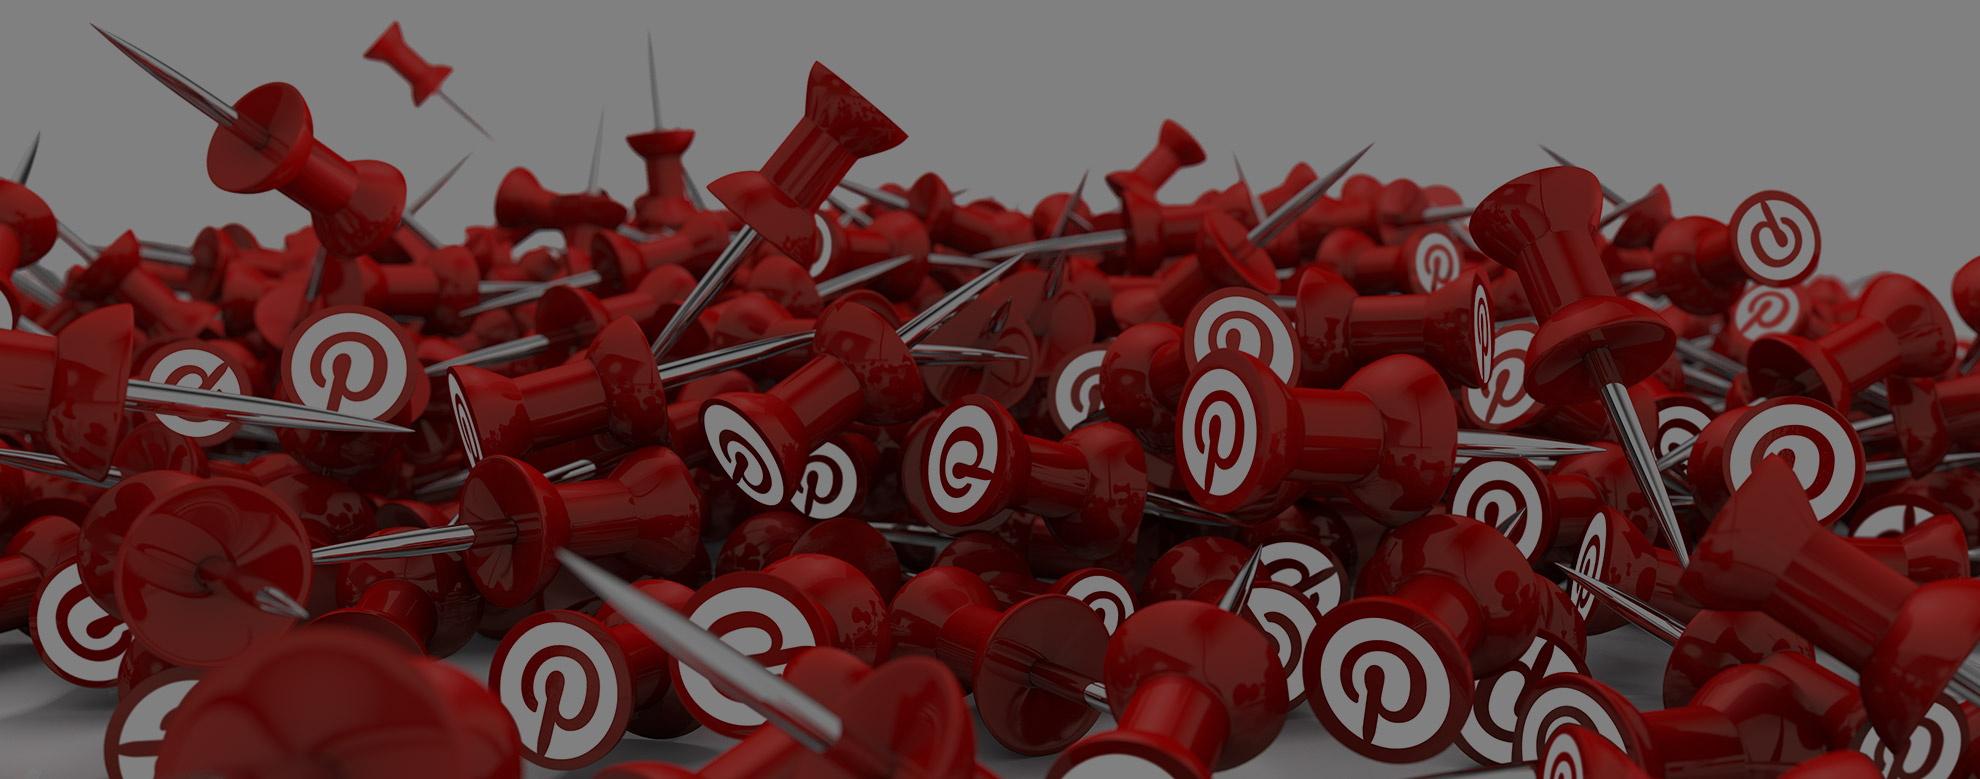 The ultimate Pinterest marketing guide: 5 killer brand strategies and tips